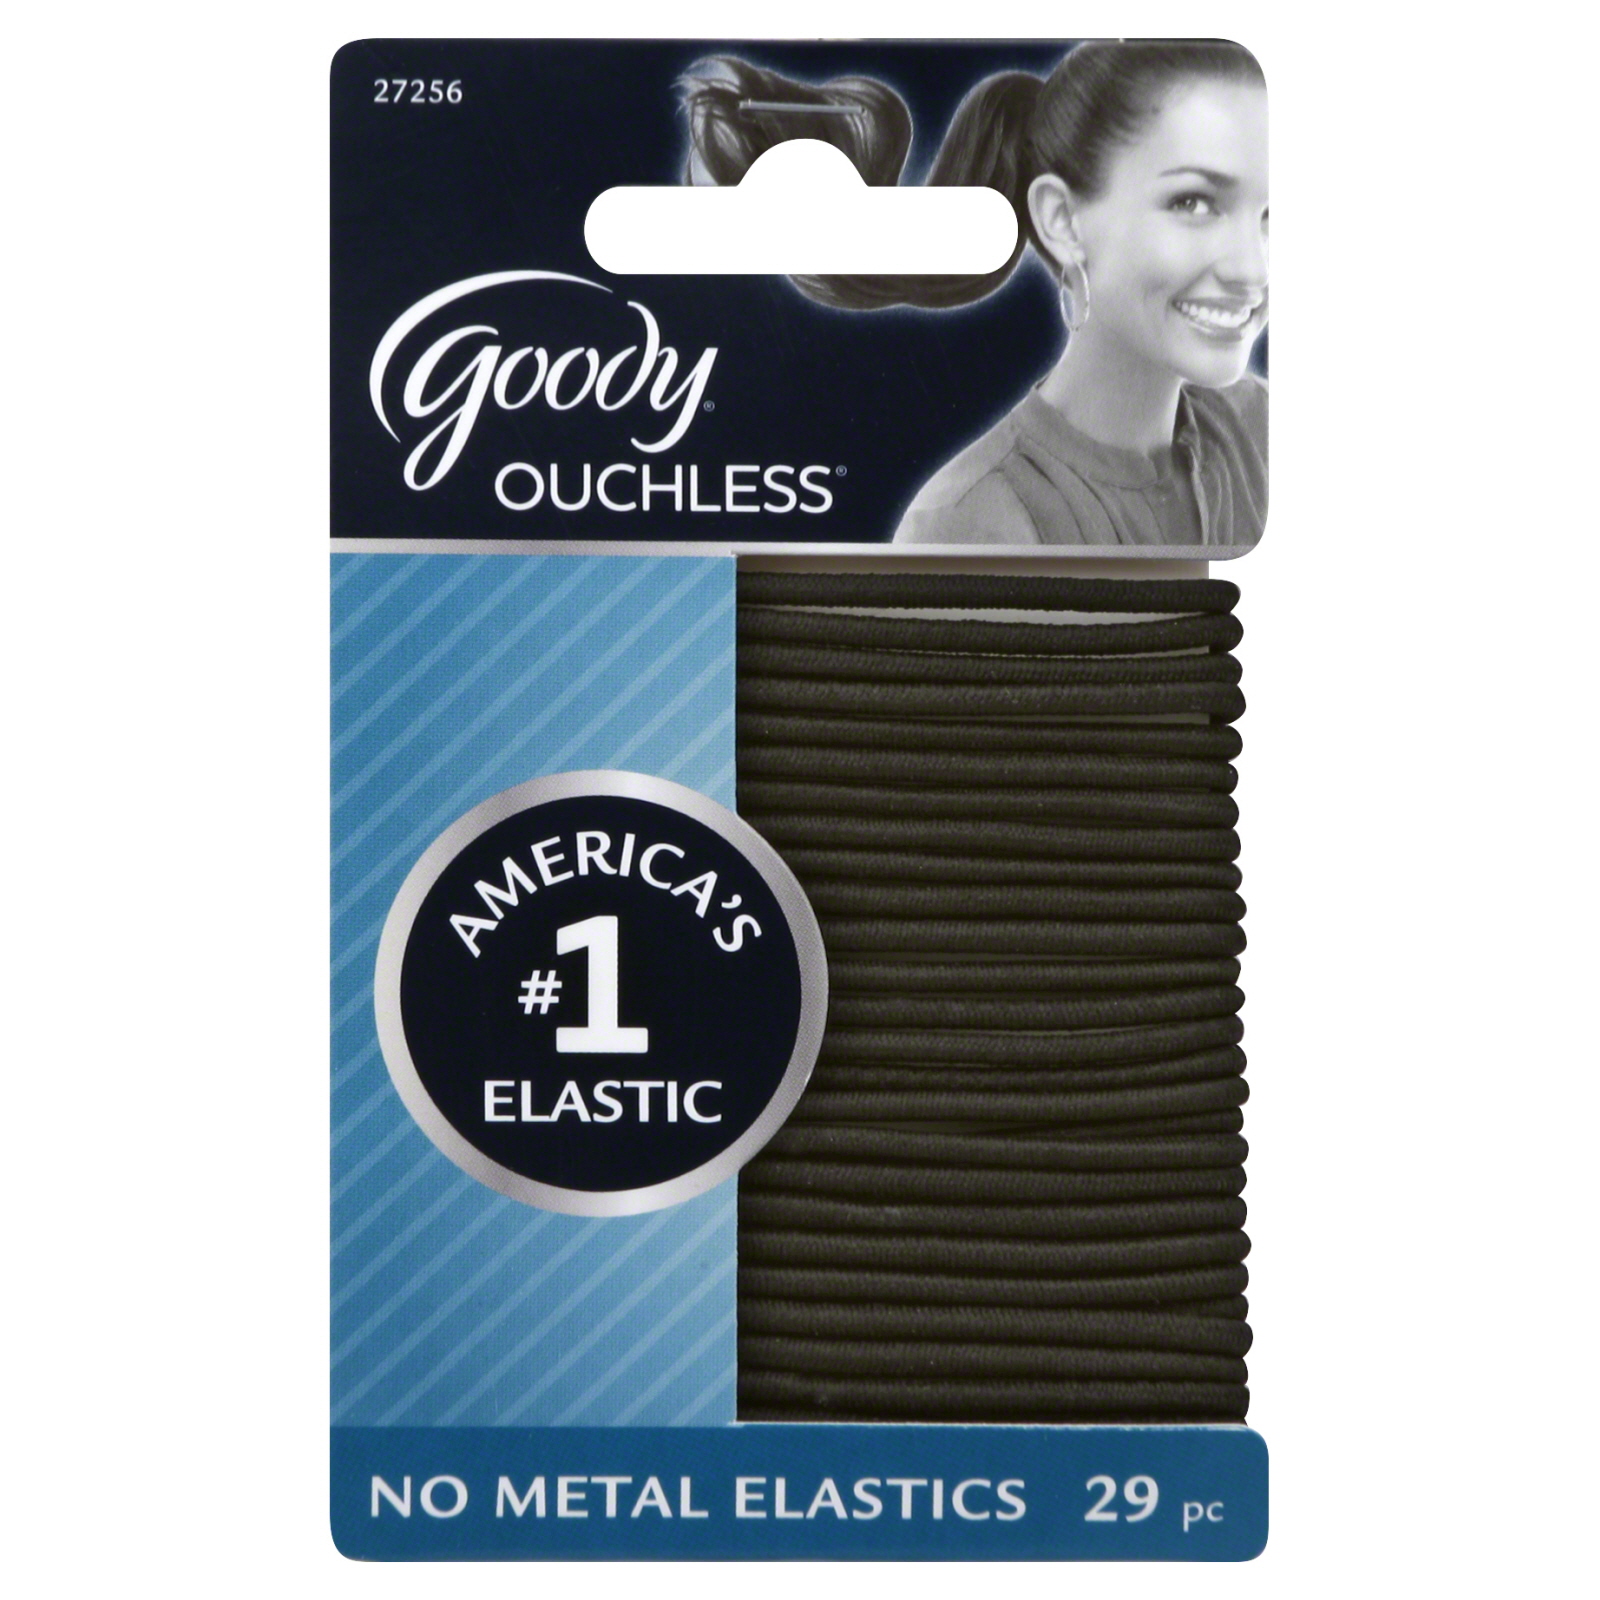 Goody Braided Elastic Ouch Less Black, 29 Ct